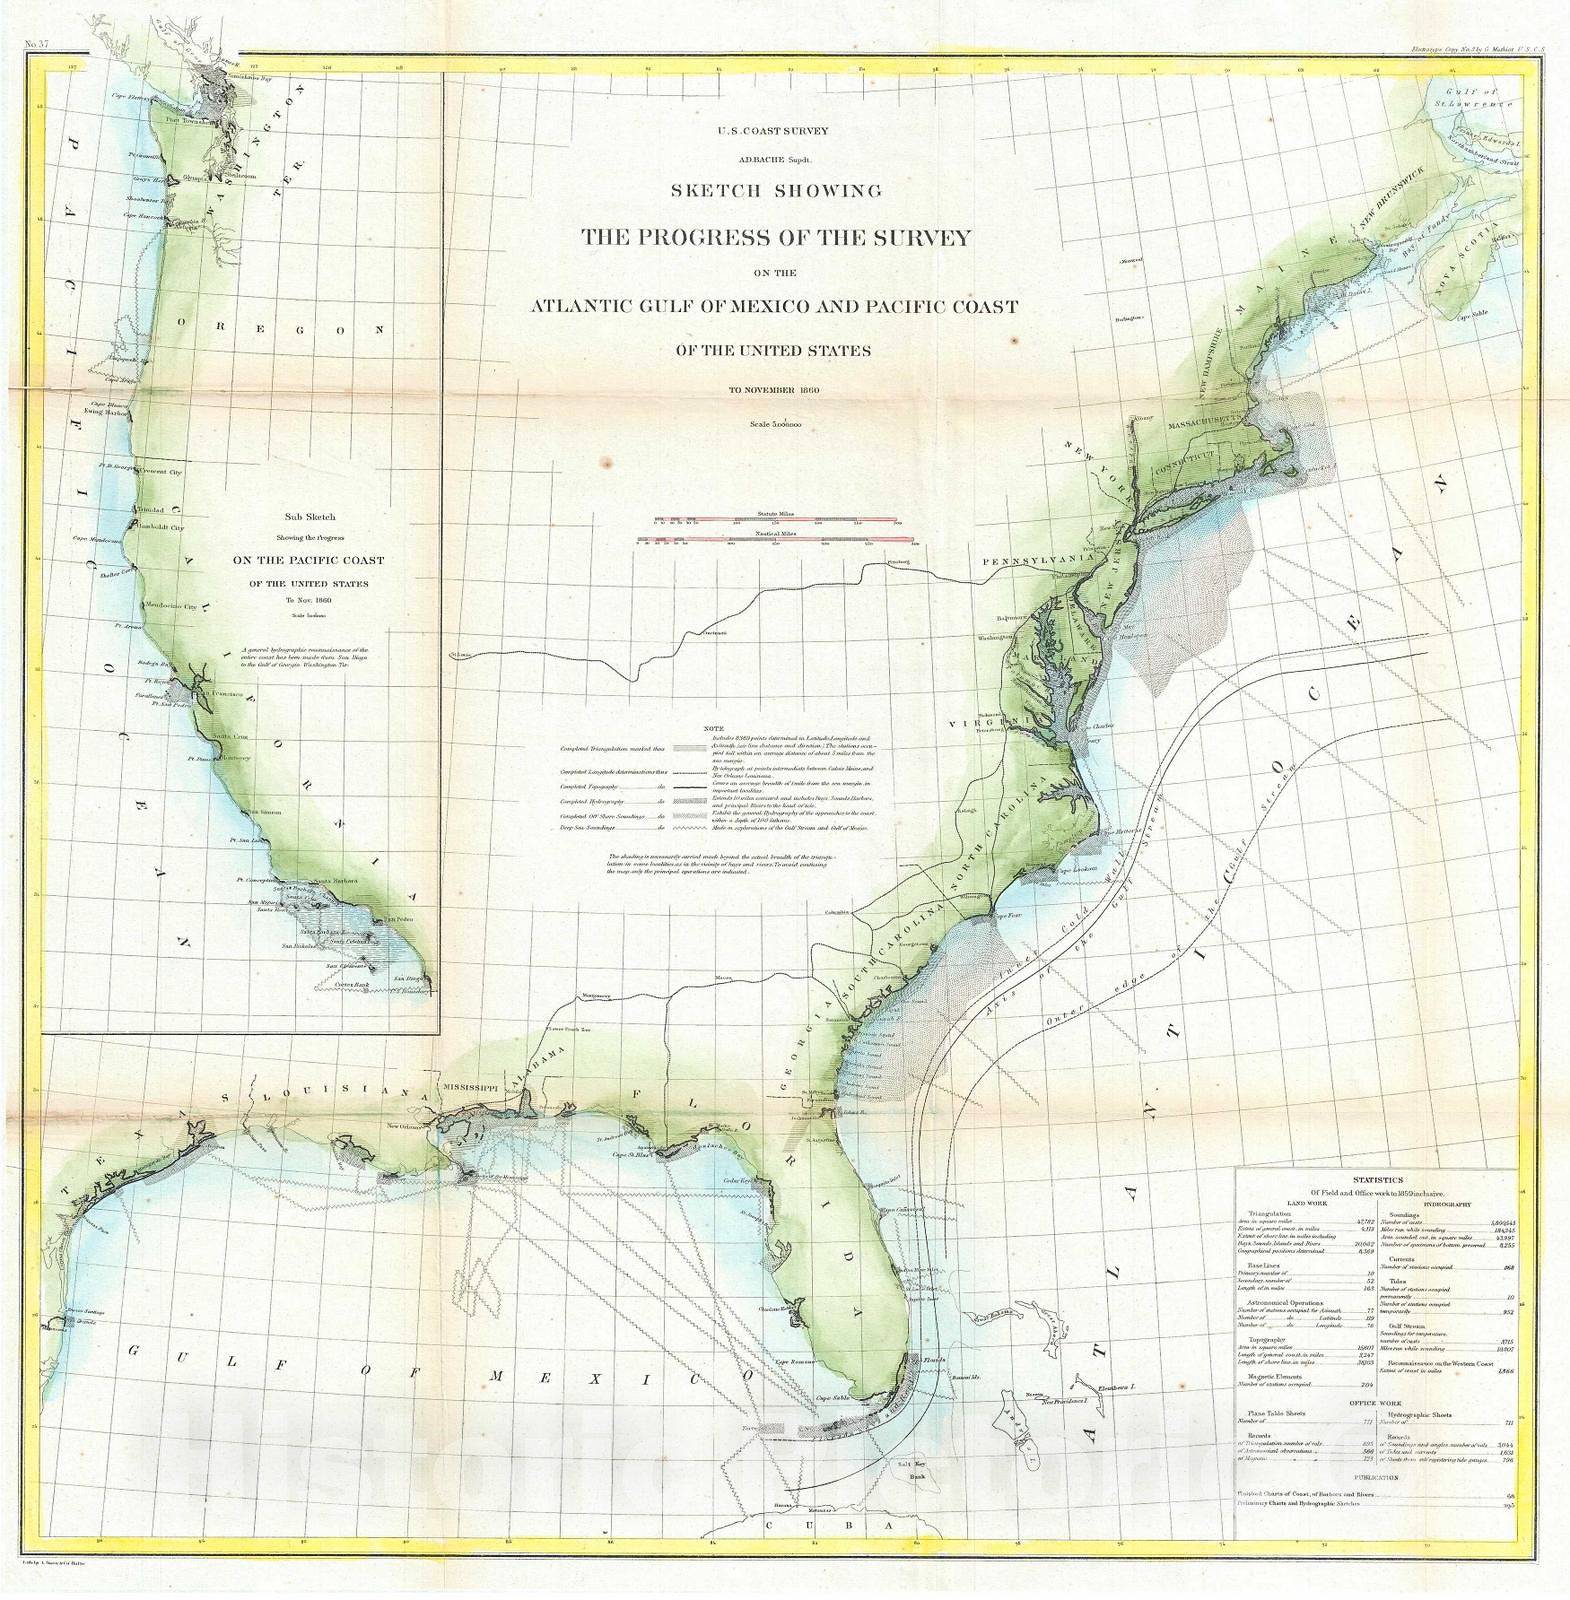 Historic Map : U.S. Coast Survey Antique Map of The Coast of The United States (Atlantic, Gulf of Mein xico and Pacific), 1860, Vintage Wall Art